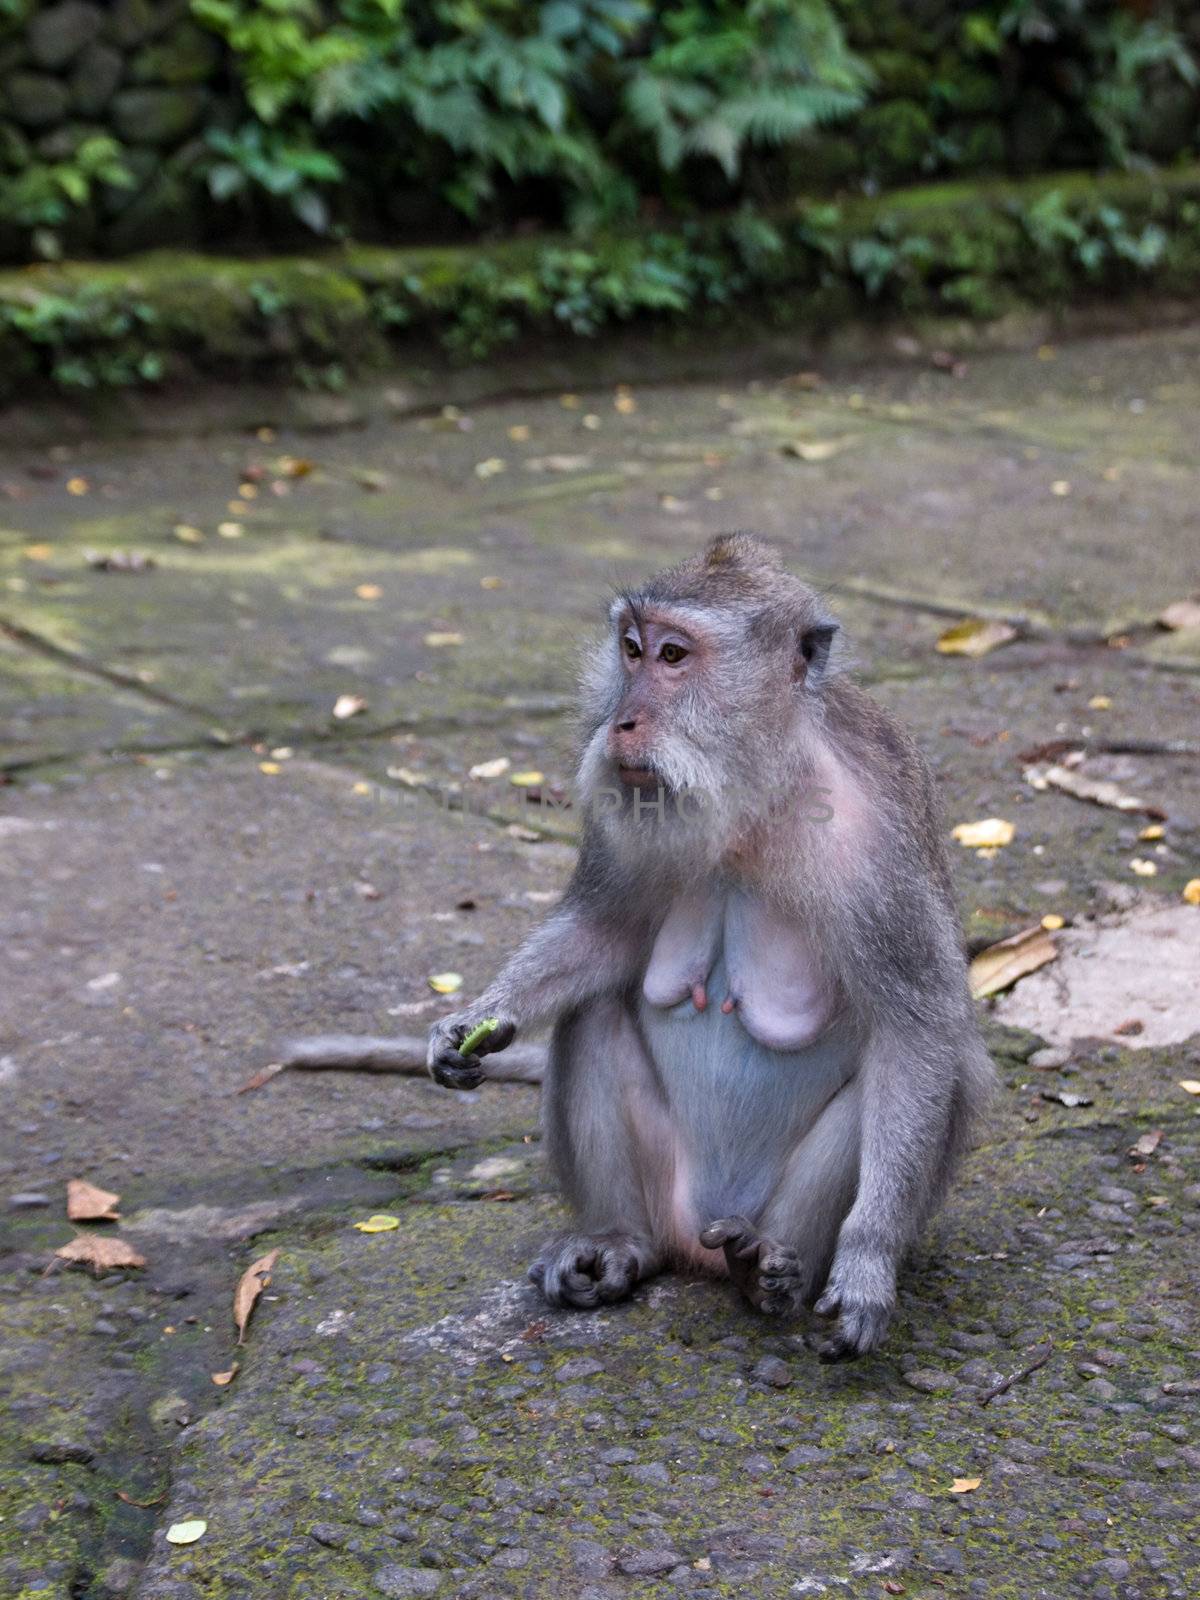 The picture was done in one of the monkey parks of Bali